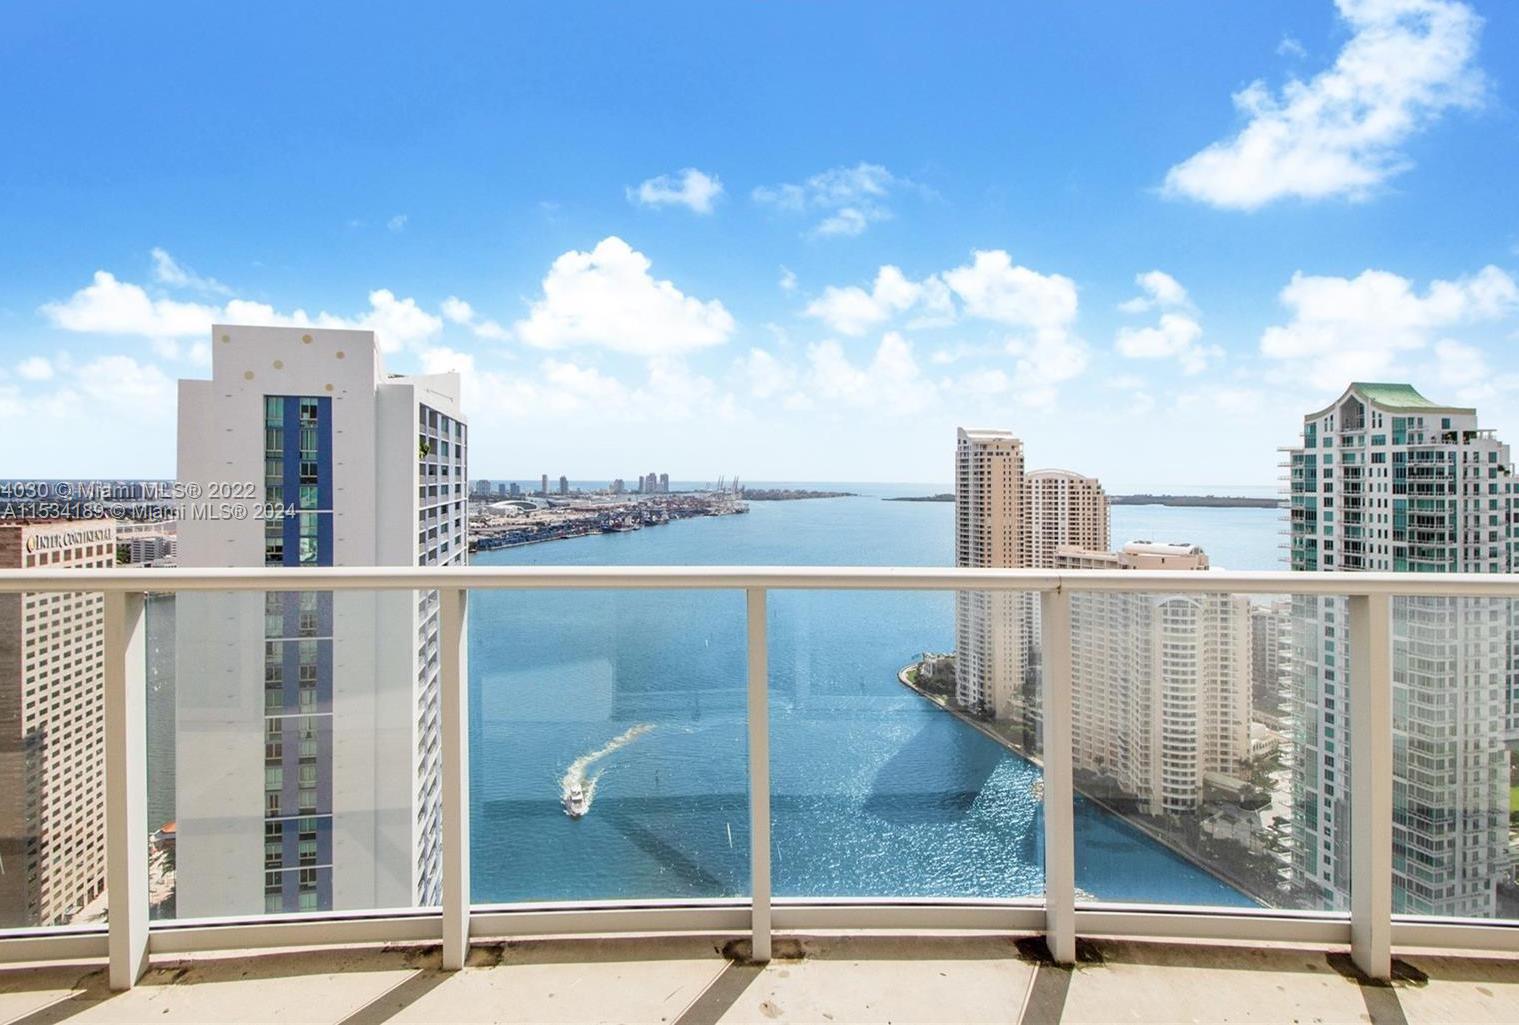 Experience breathtaking Biscayne Bay views from this furnished gem in Miami's Met 1 tower. Close to Bayfront Park, Kaseya Center, and plenty of dining and shopping options. Inside, enjoy a modern kitchen, spacious closets, and all-new furniture. Amenities include a fitness center, sauna, lounge, and game room. Basic cable, internet, and one parking space included, with the option to rent additional spaces. This 2 Bed/2 Bath unit features tile flooring, glass windows, and a gourmet kitchen. Met1 Tower offers luxury amenities and is conveniently located near Whole Foods, Silver Spot Cinema, and more. Tenant occupied until July 2024.